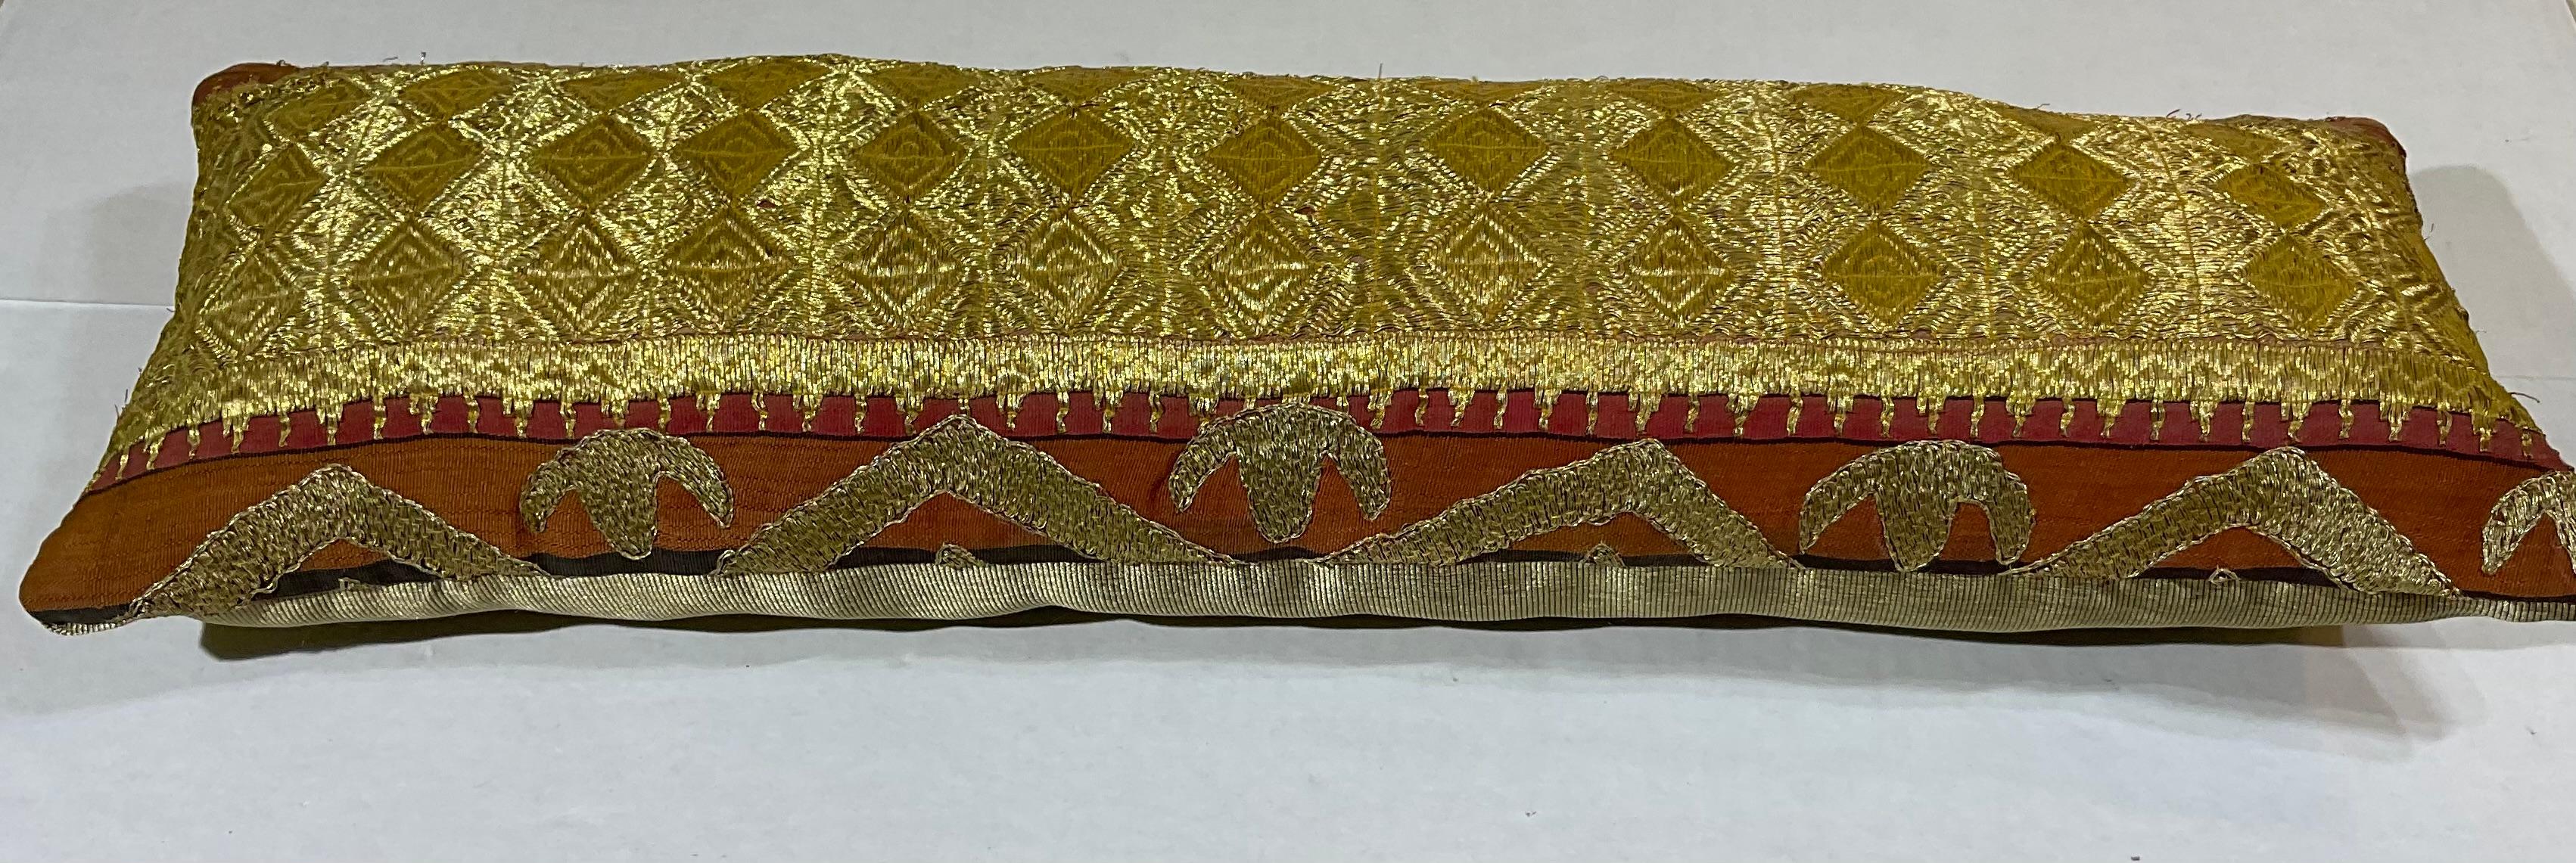 Single Antique Embroidery Textile Pillow For Sale 1